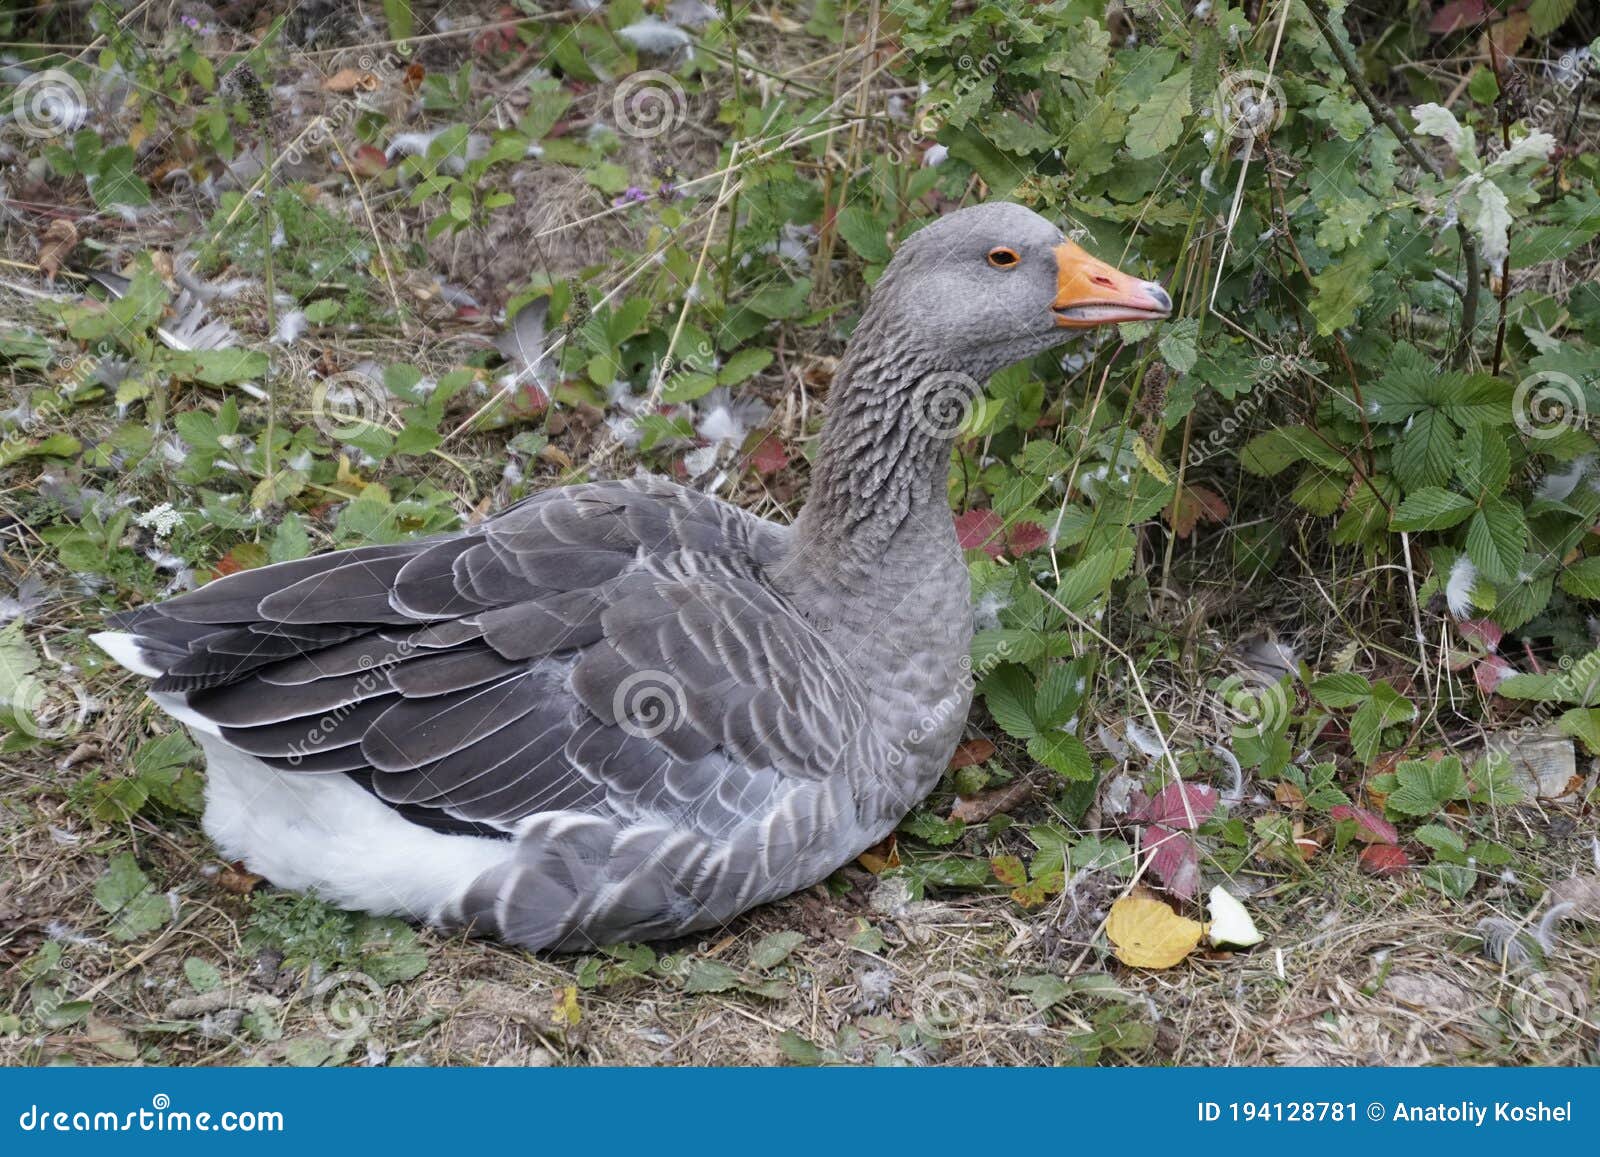 the gray goose, officially known as anser anser. wild nature.